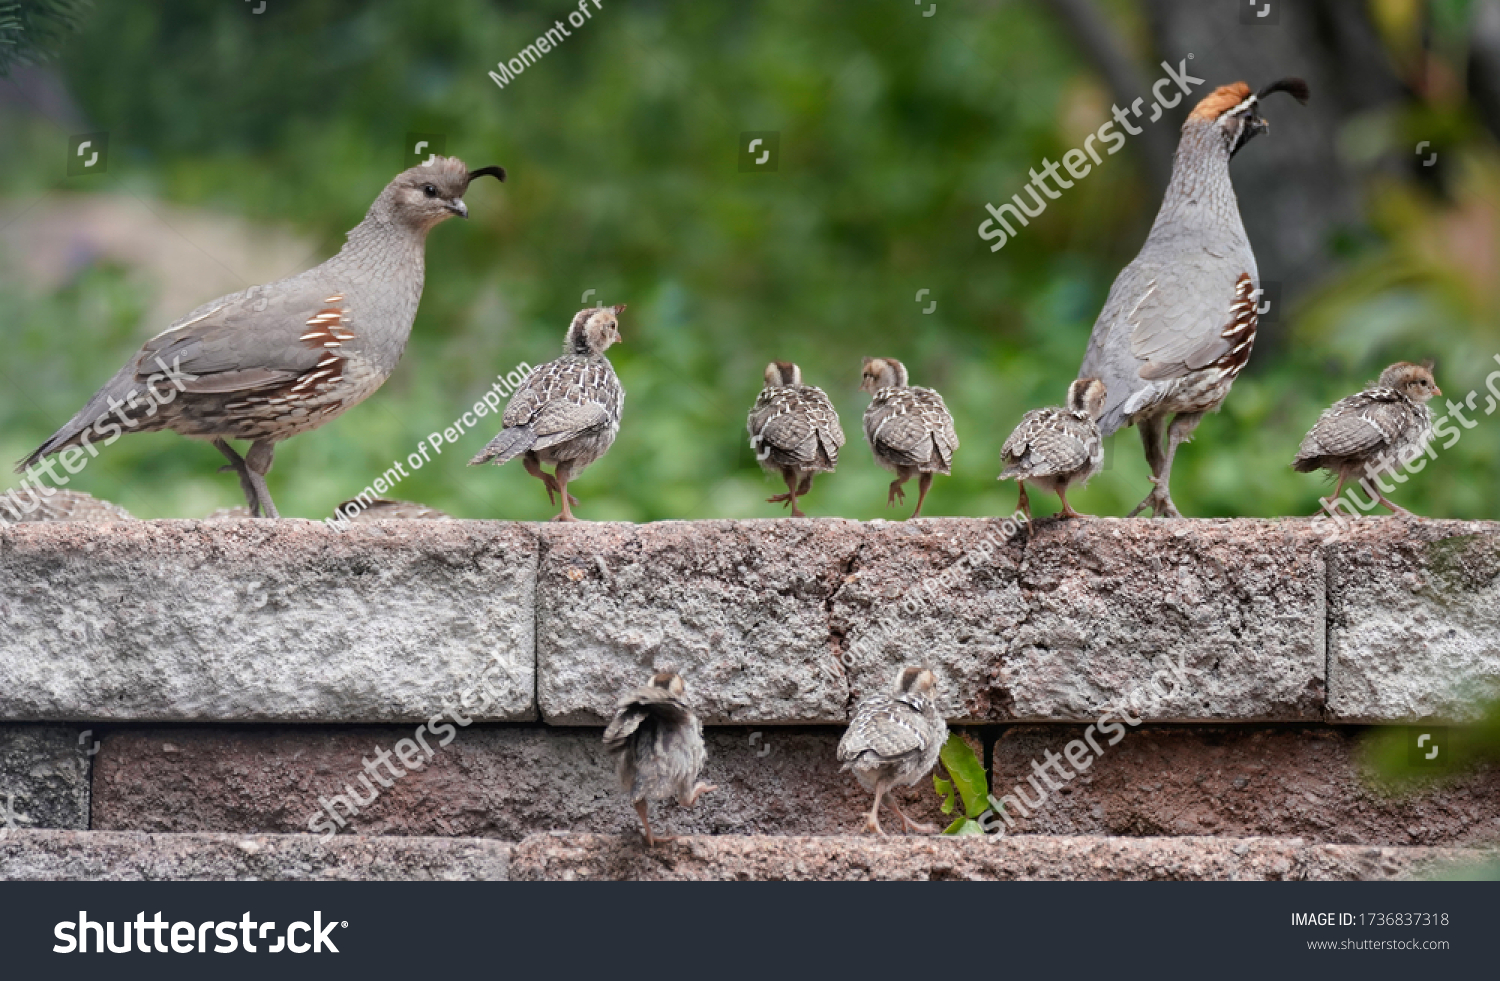 A family of quail chicks have an outing with Mom and Dad. #1736837318